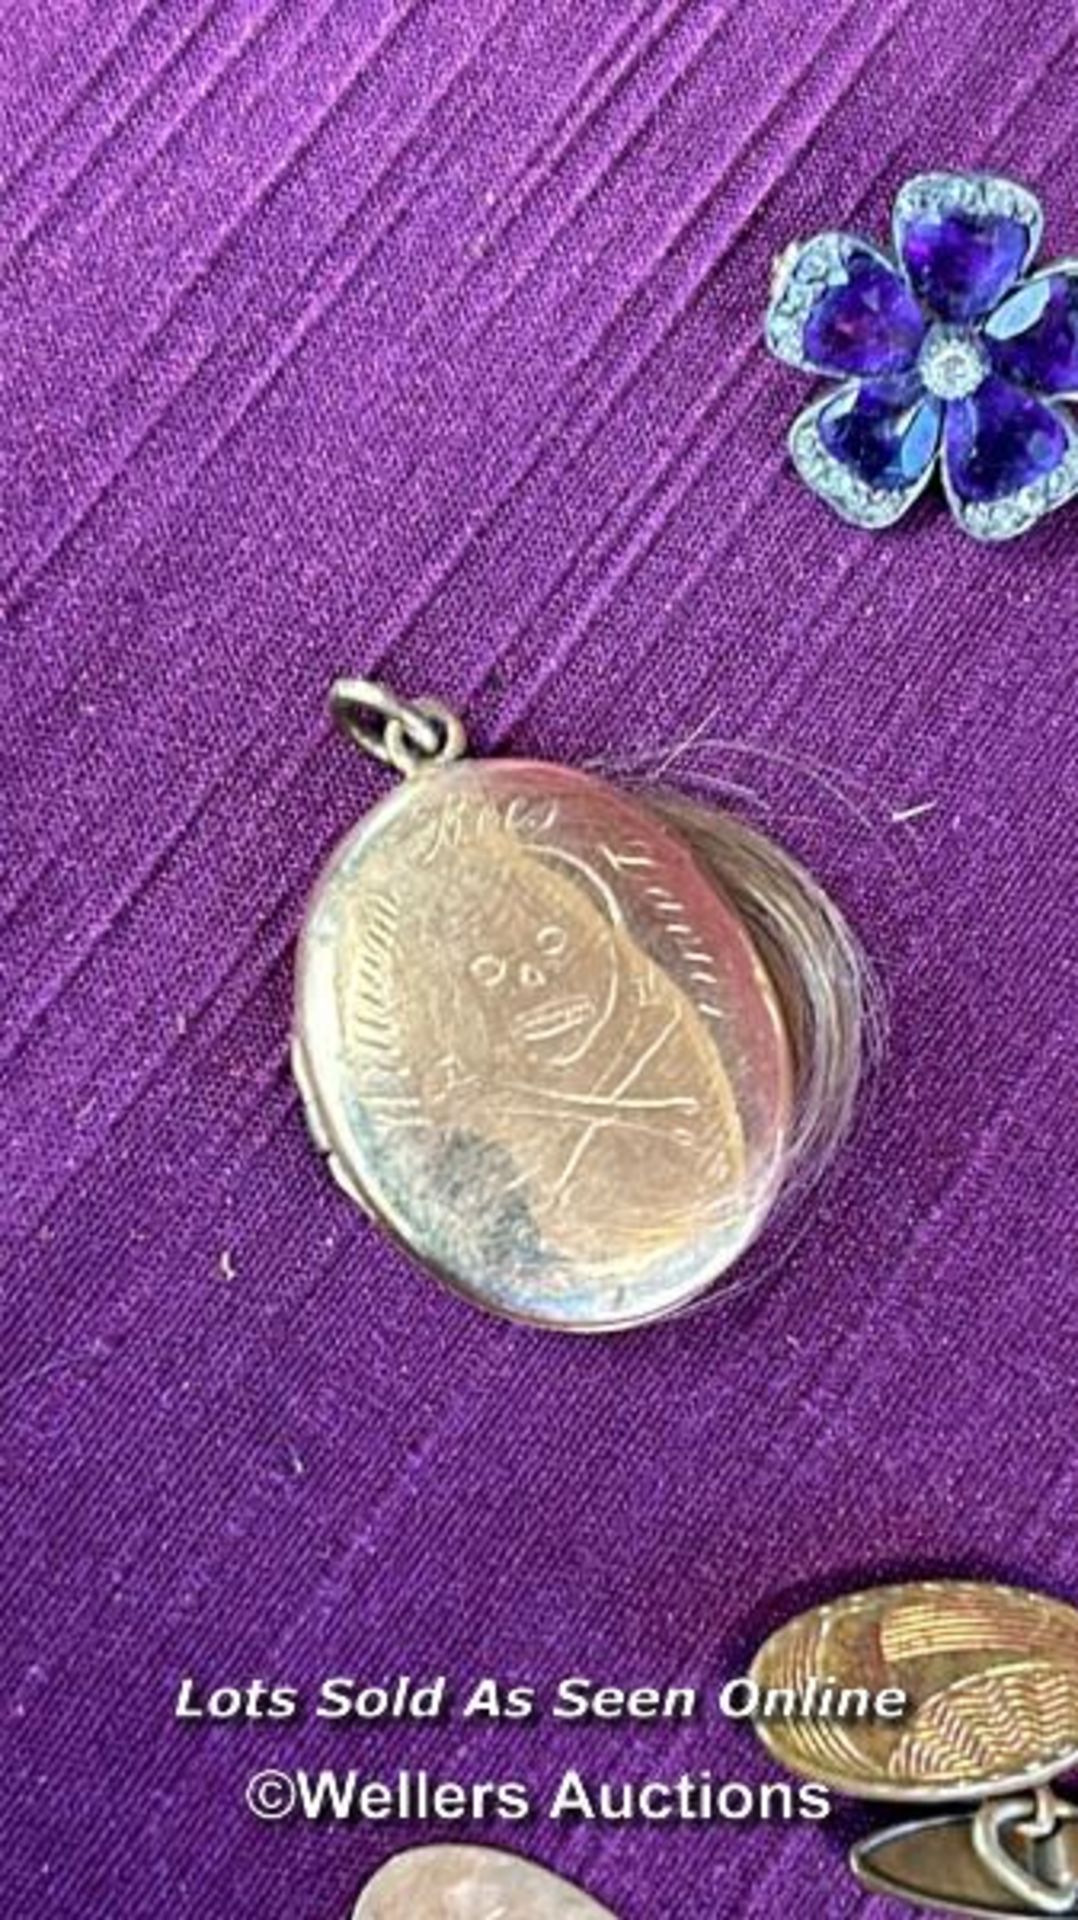 AN UNUSUAL GOLD LOCKET CONTAINING A LOCK OF HAIR, DECORATED WITH ETCHED SKULL AND CROSSBONES, - Image 2 of 6